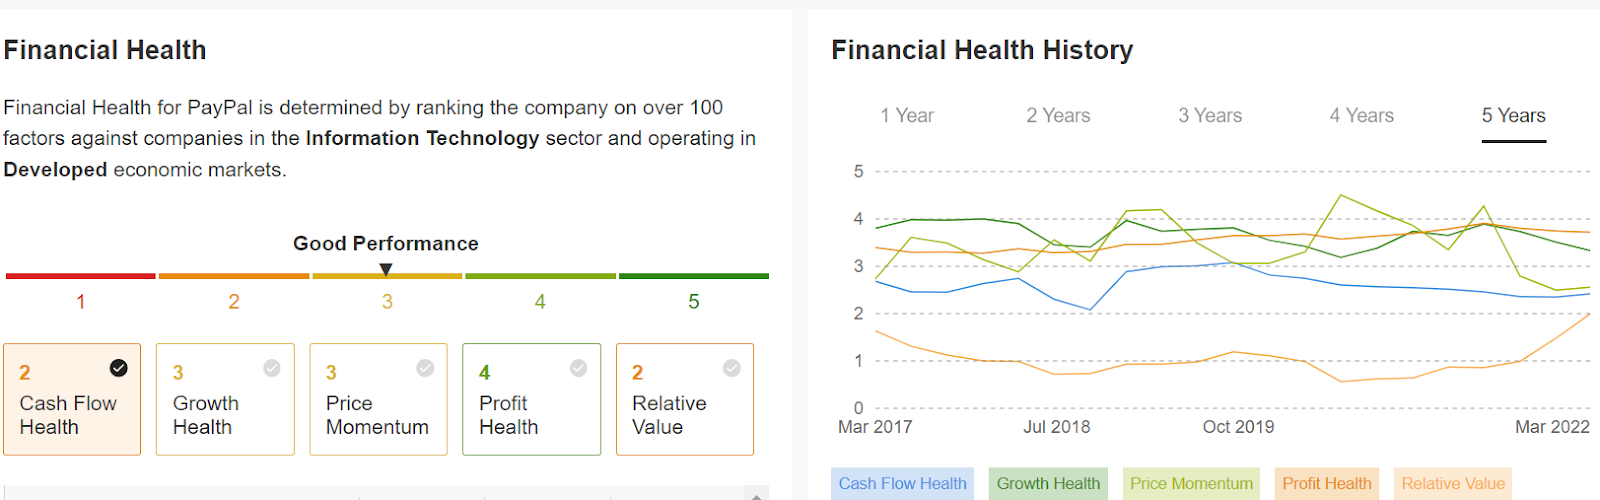 PayPal's Financial Health